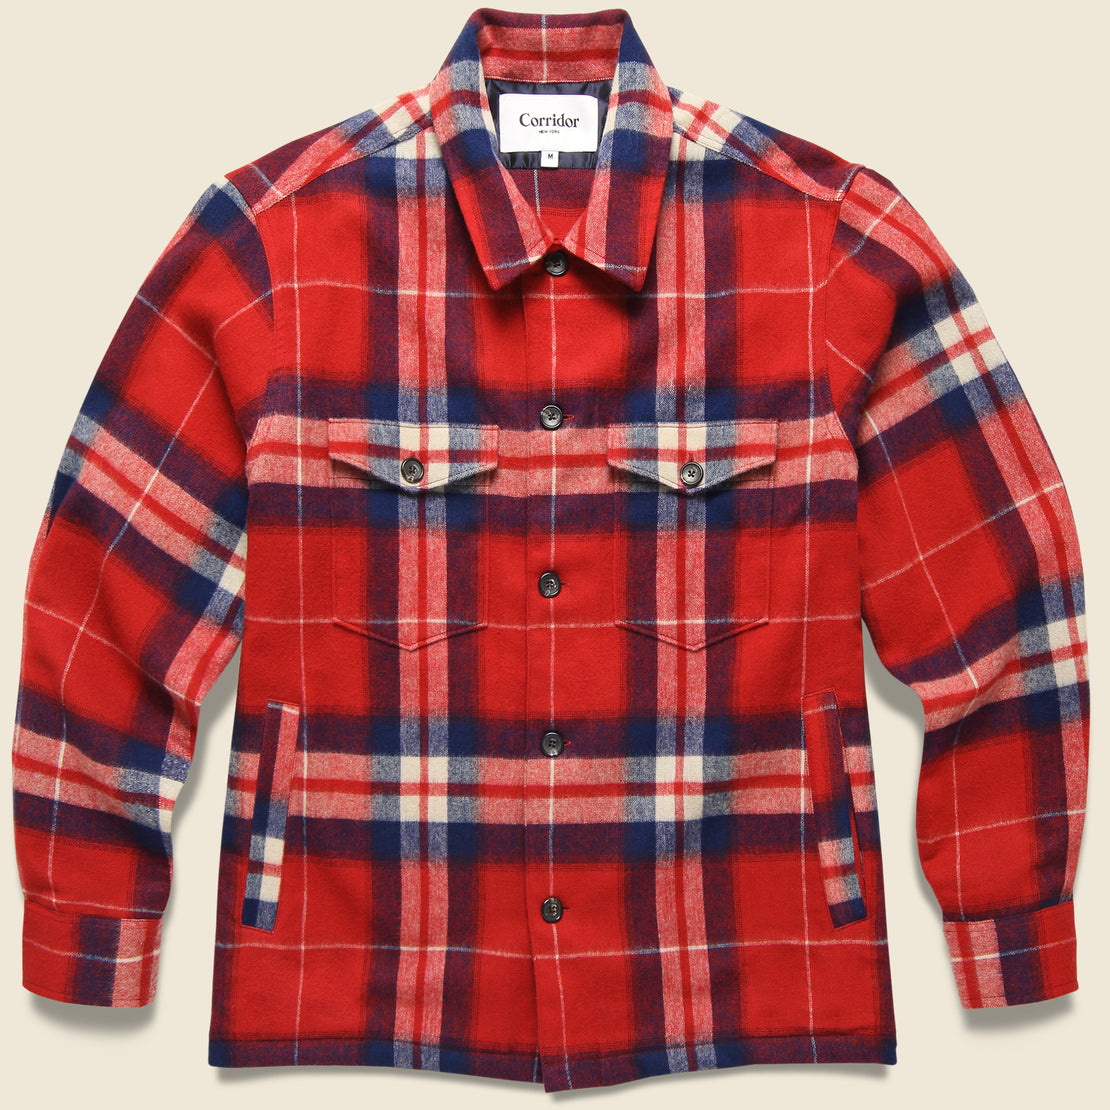 Corridor Ombre Plaid Military Shirt Jacket - Red